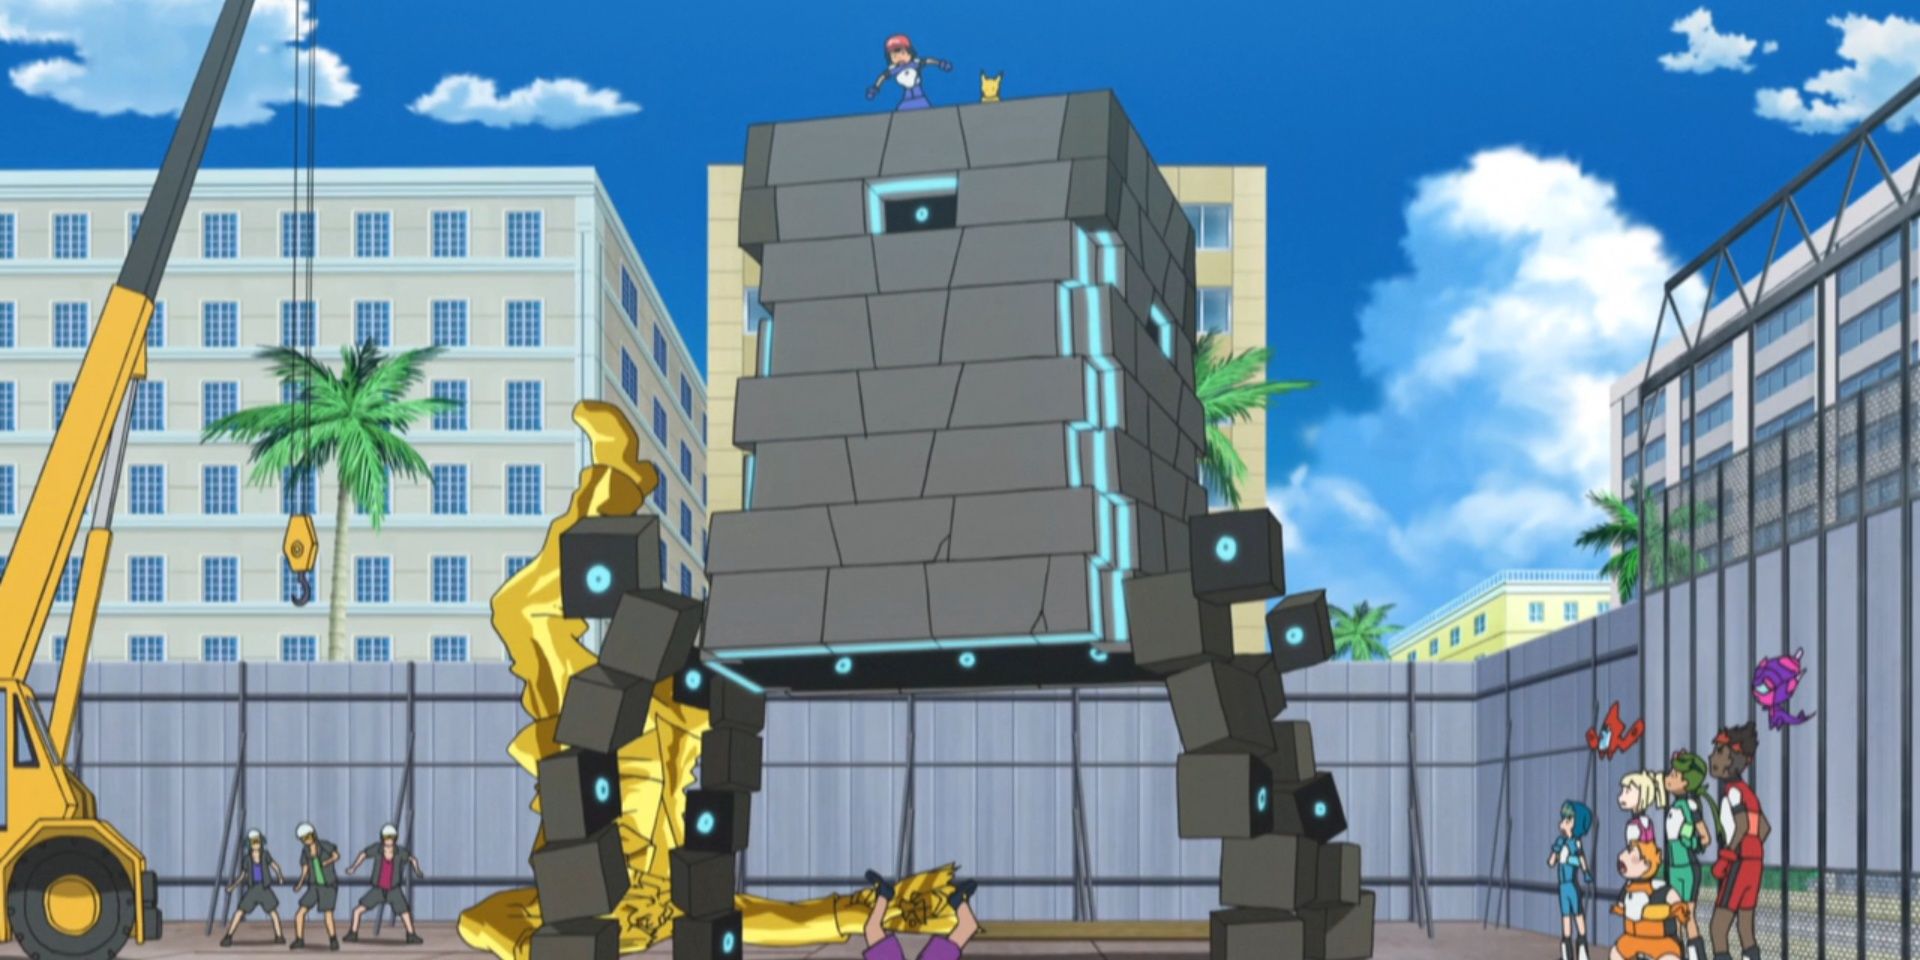 Stakataka in a construction site with all the characters from the anime